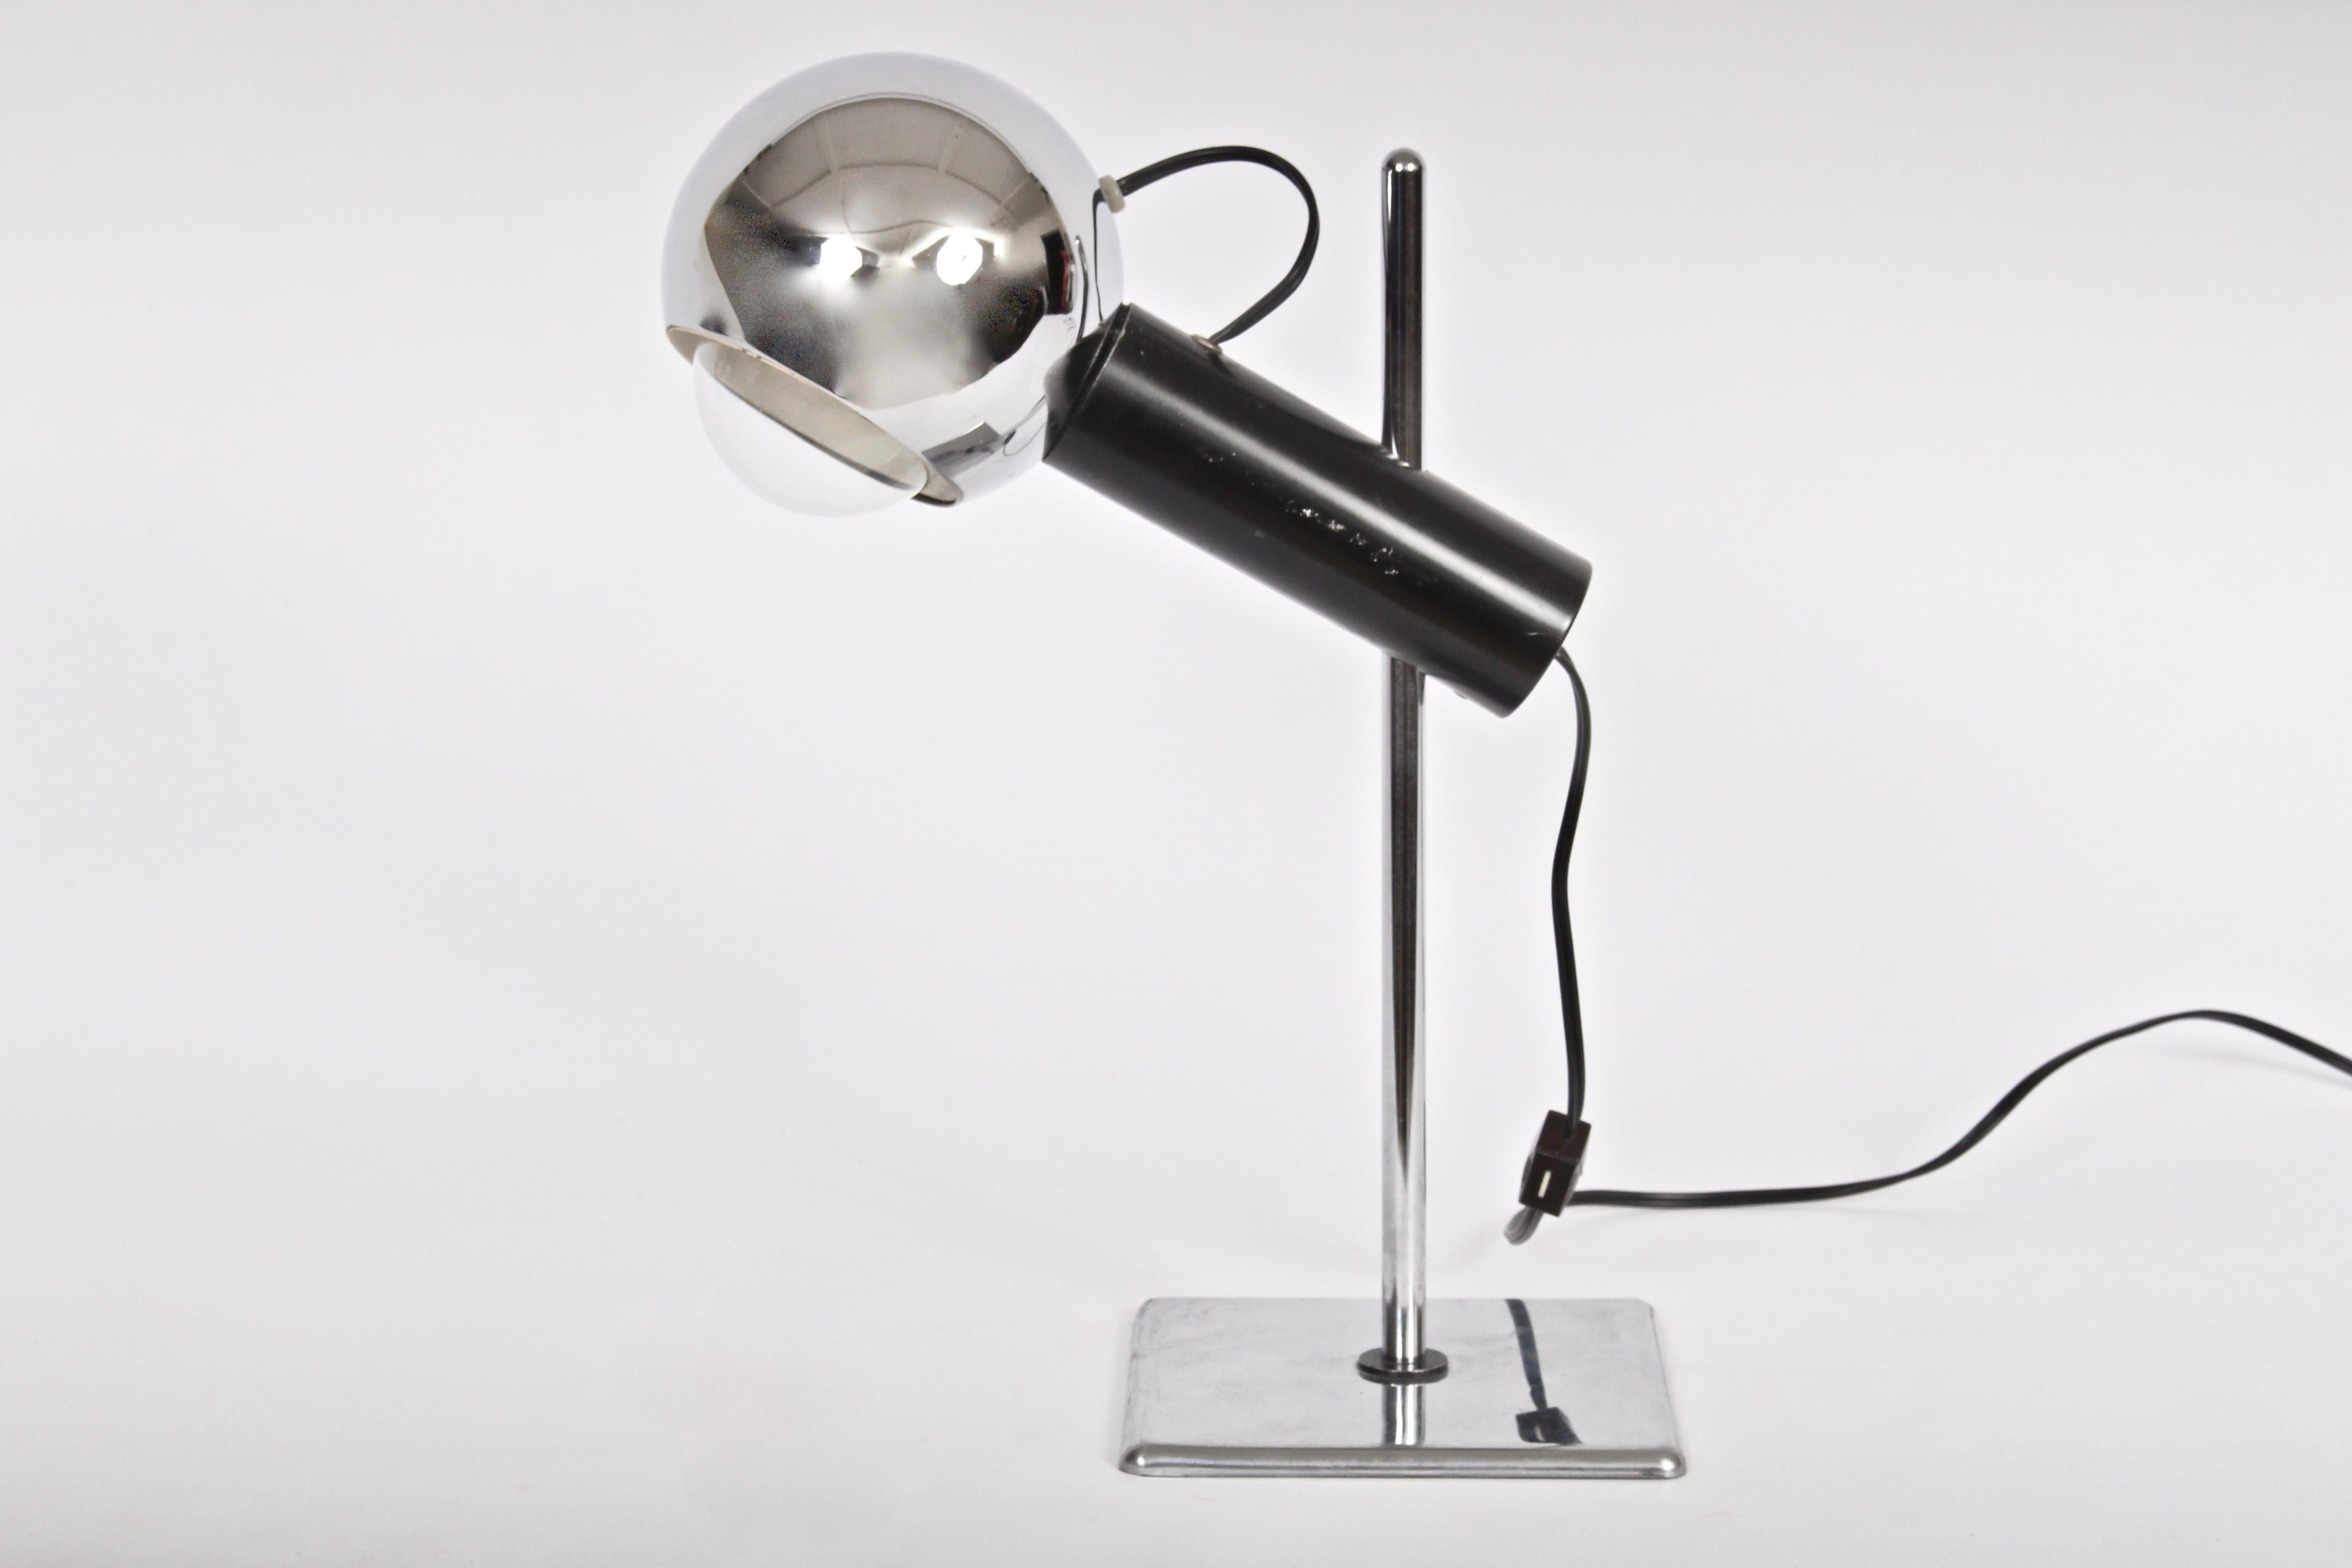 Angelo Lelli style adjustable magnetic chrome reading lamp, bedside lamp with chrome swivel eyeball shade. 1960's. Featuring a black magnetic arm bar, 5D chrome ball shade adjusting 360 degrees, interior liner shade, adjustable chrome stem (stem